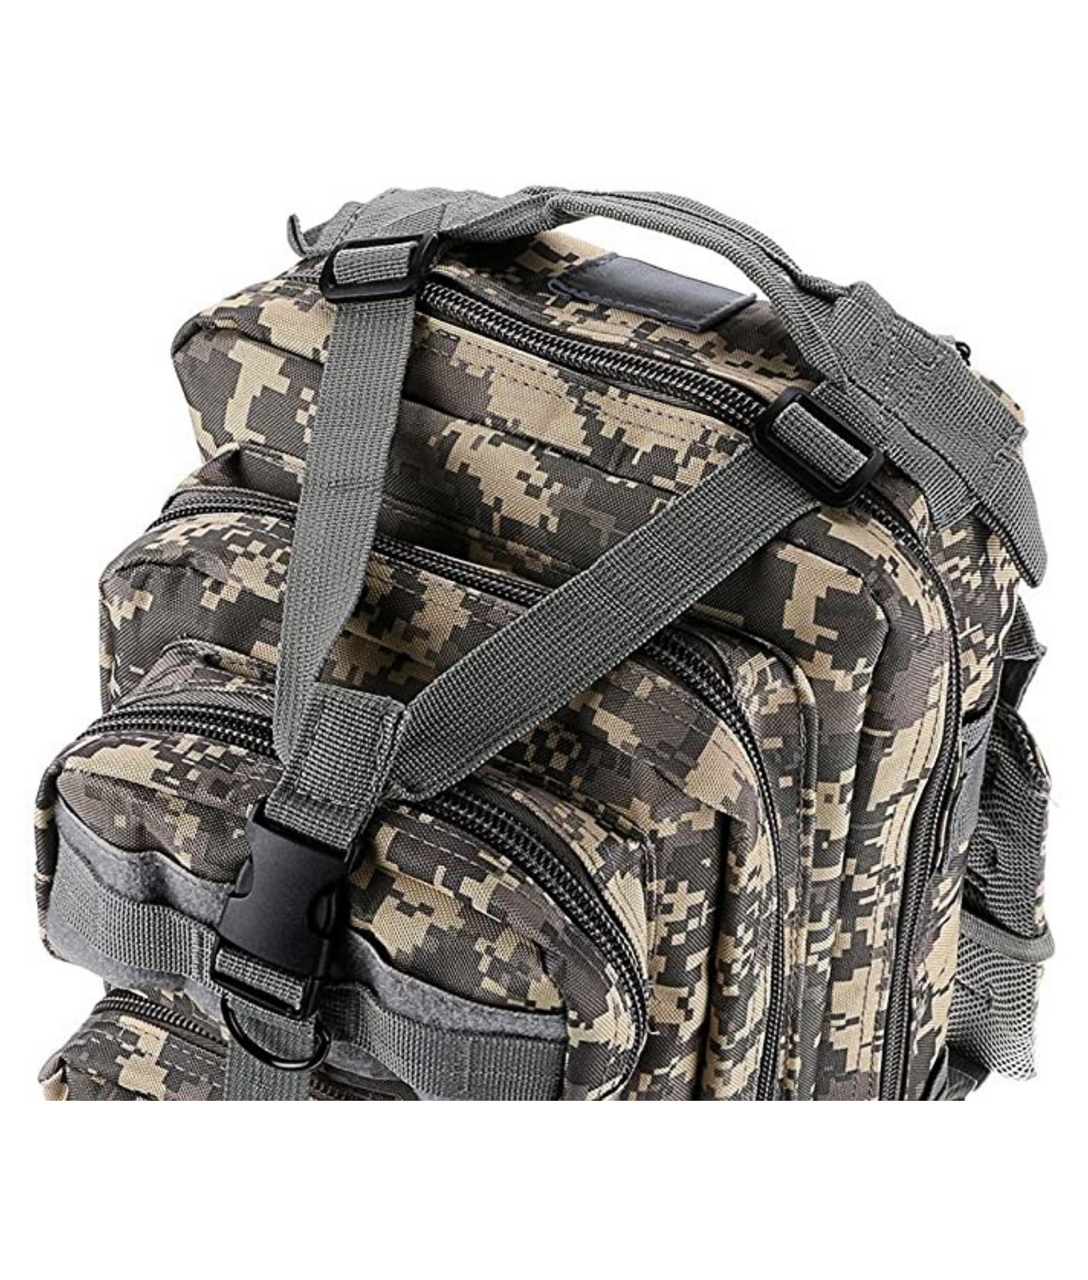 Tactical Military 25L Molle Backpack product image